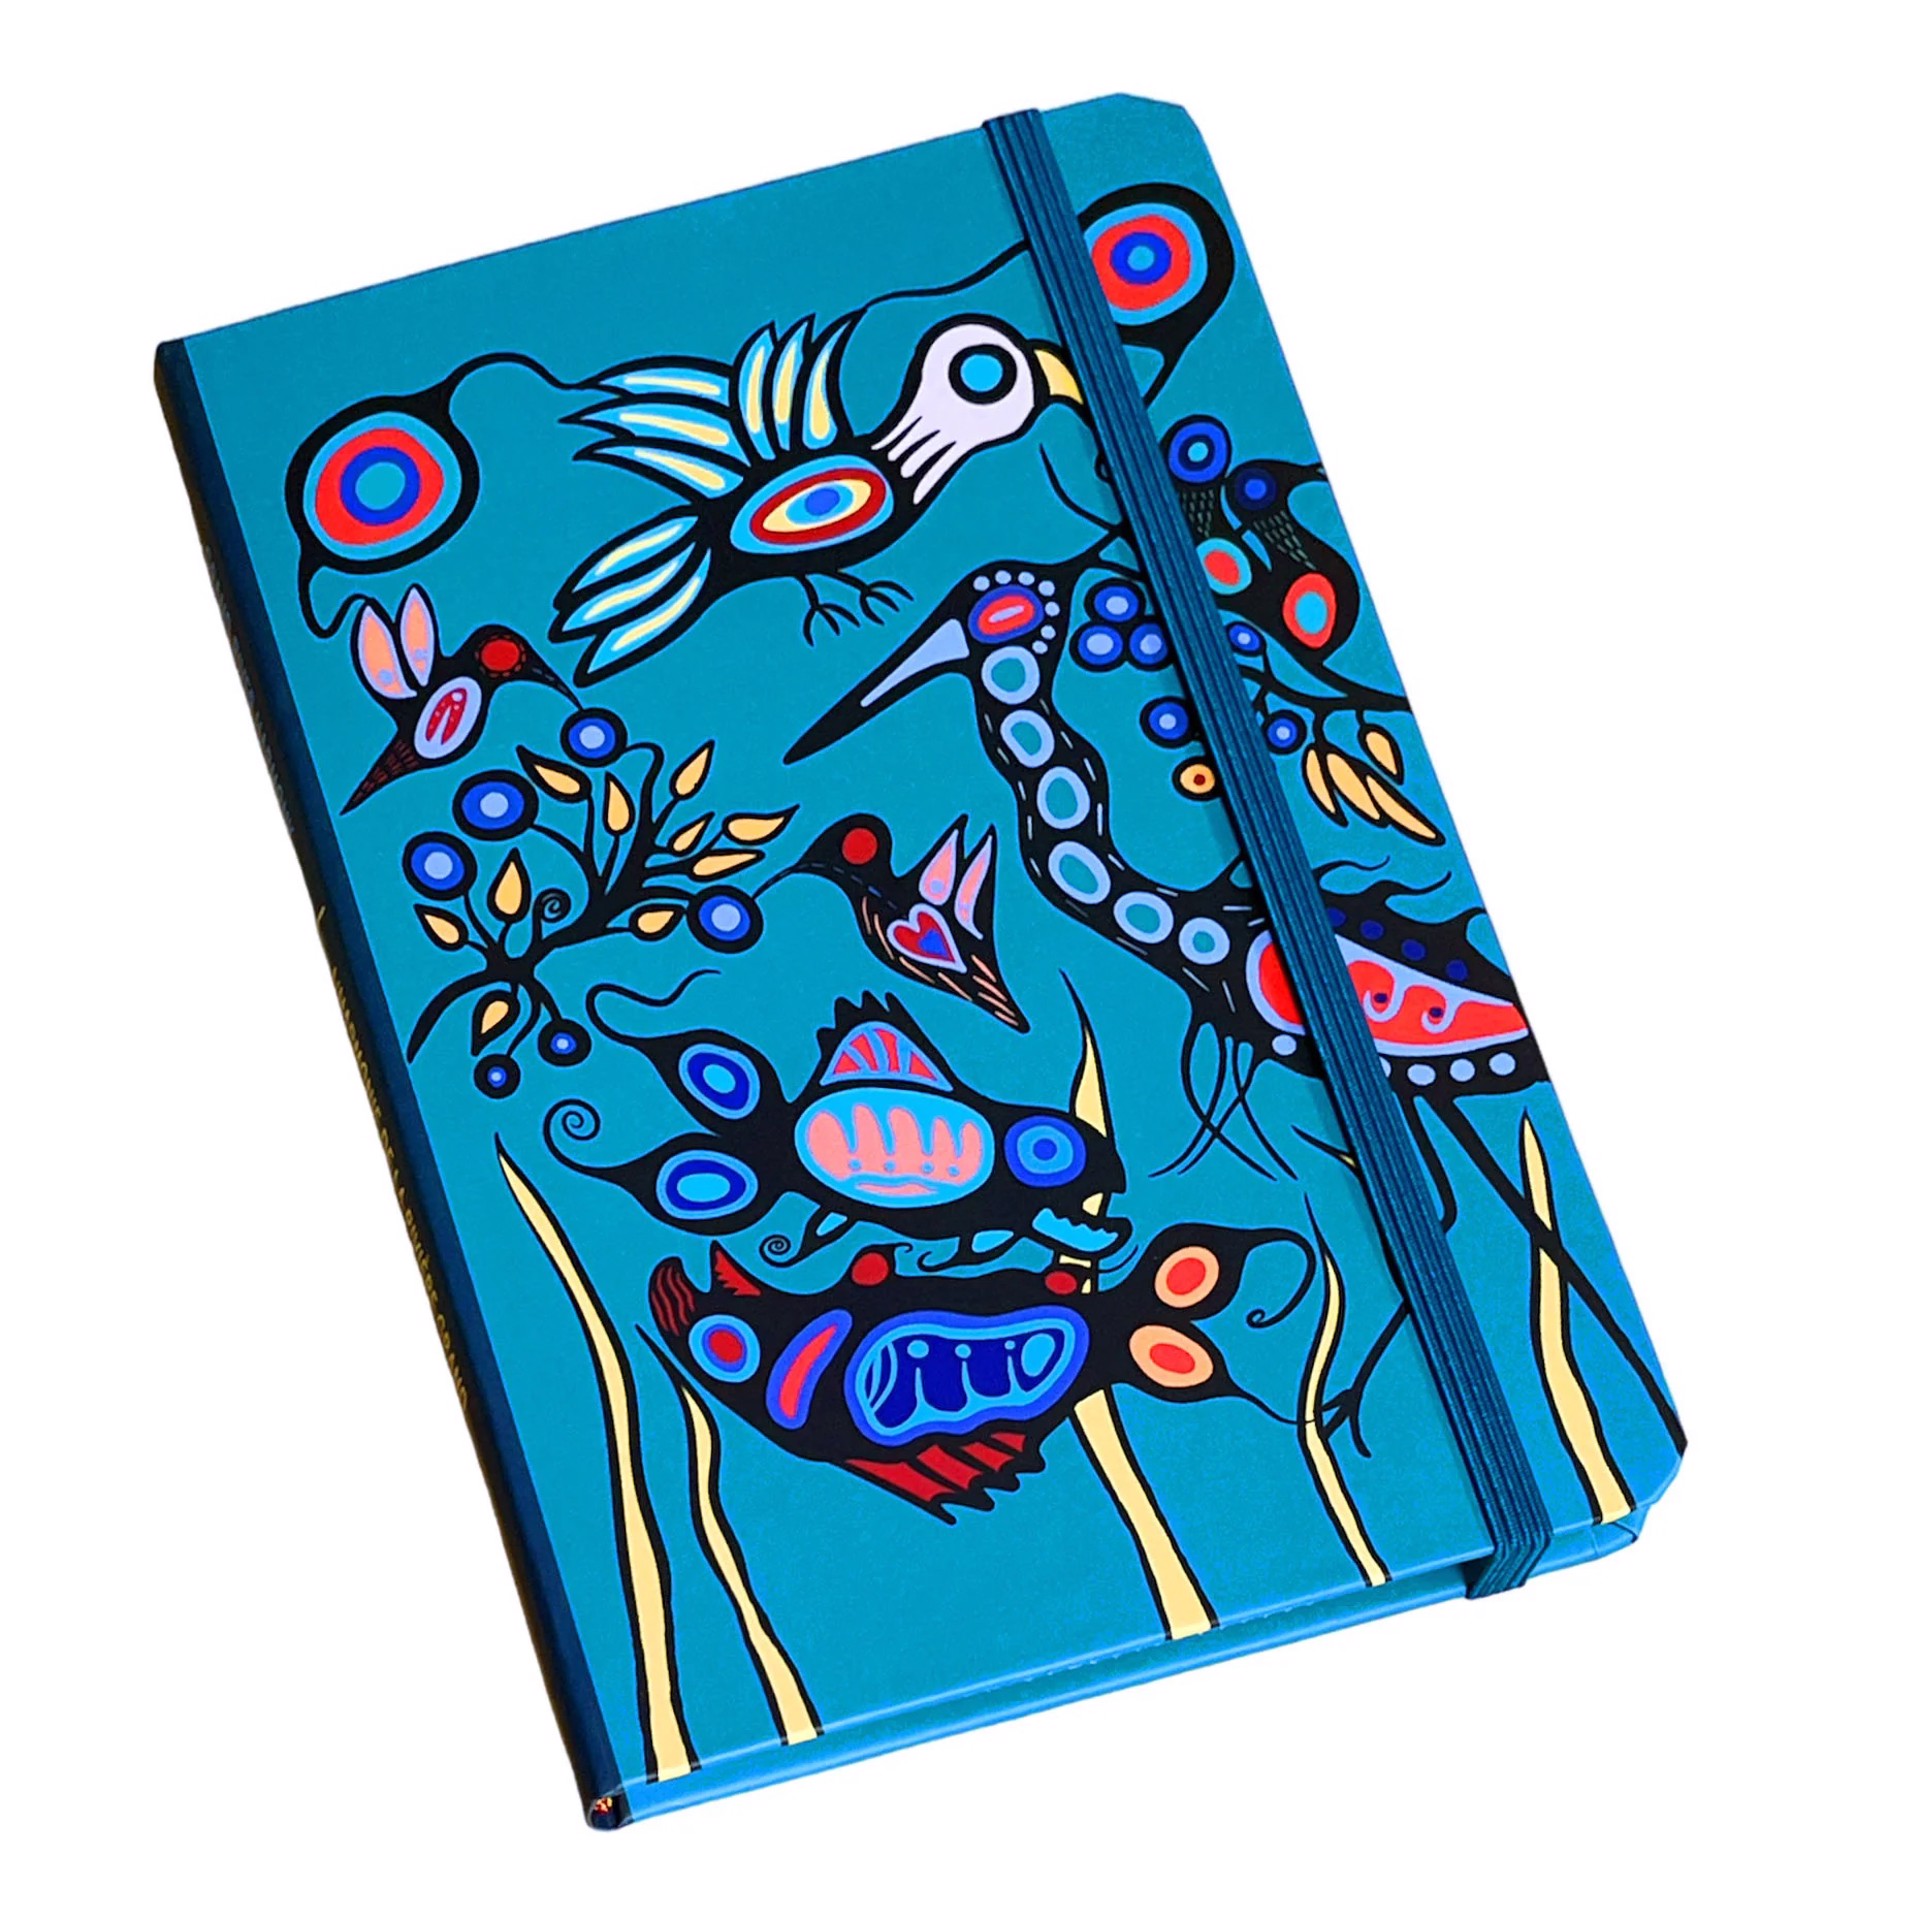 Grand River Harmony Hardcover Journal by Cody James Houle